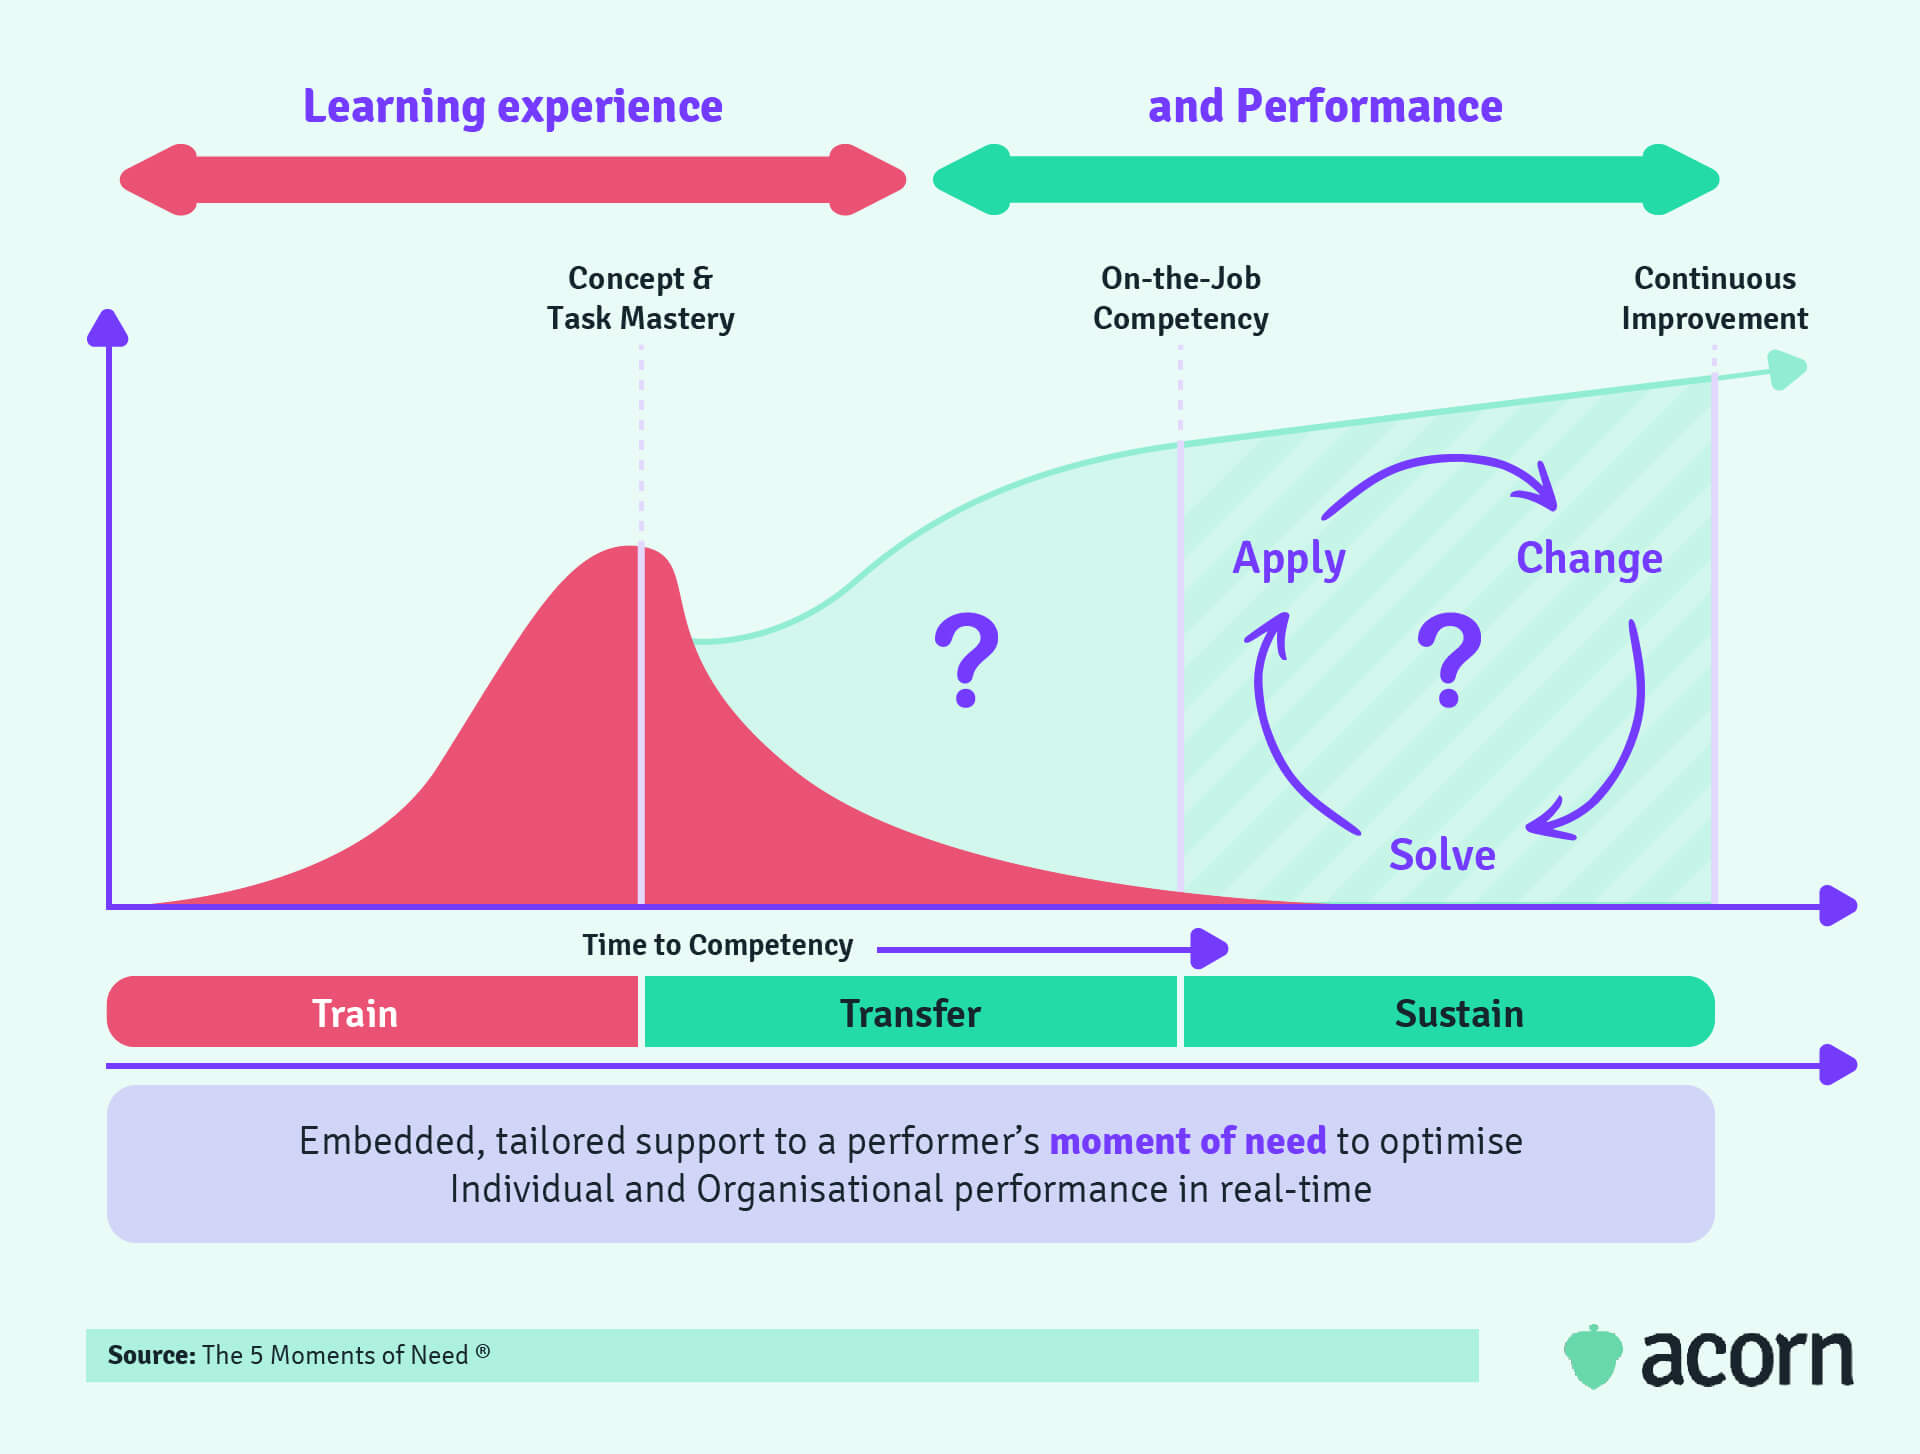 Graph showing employee time to competency as affected by learning and development.